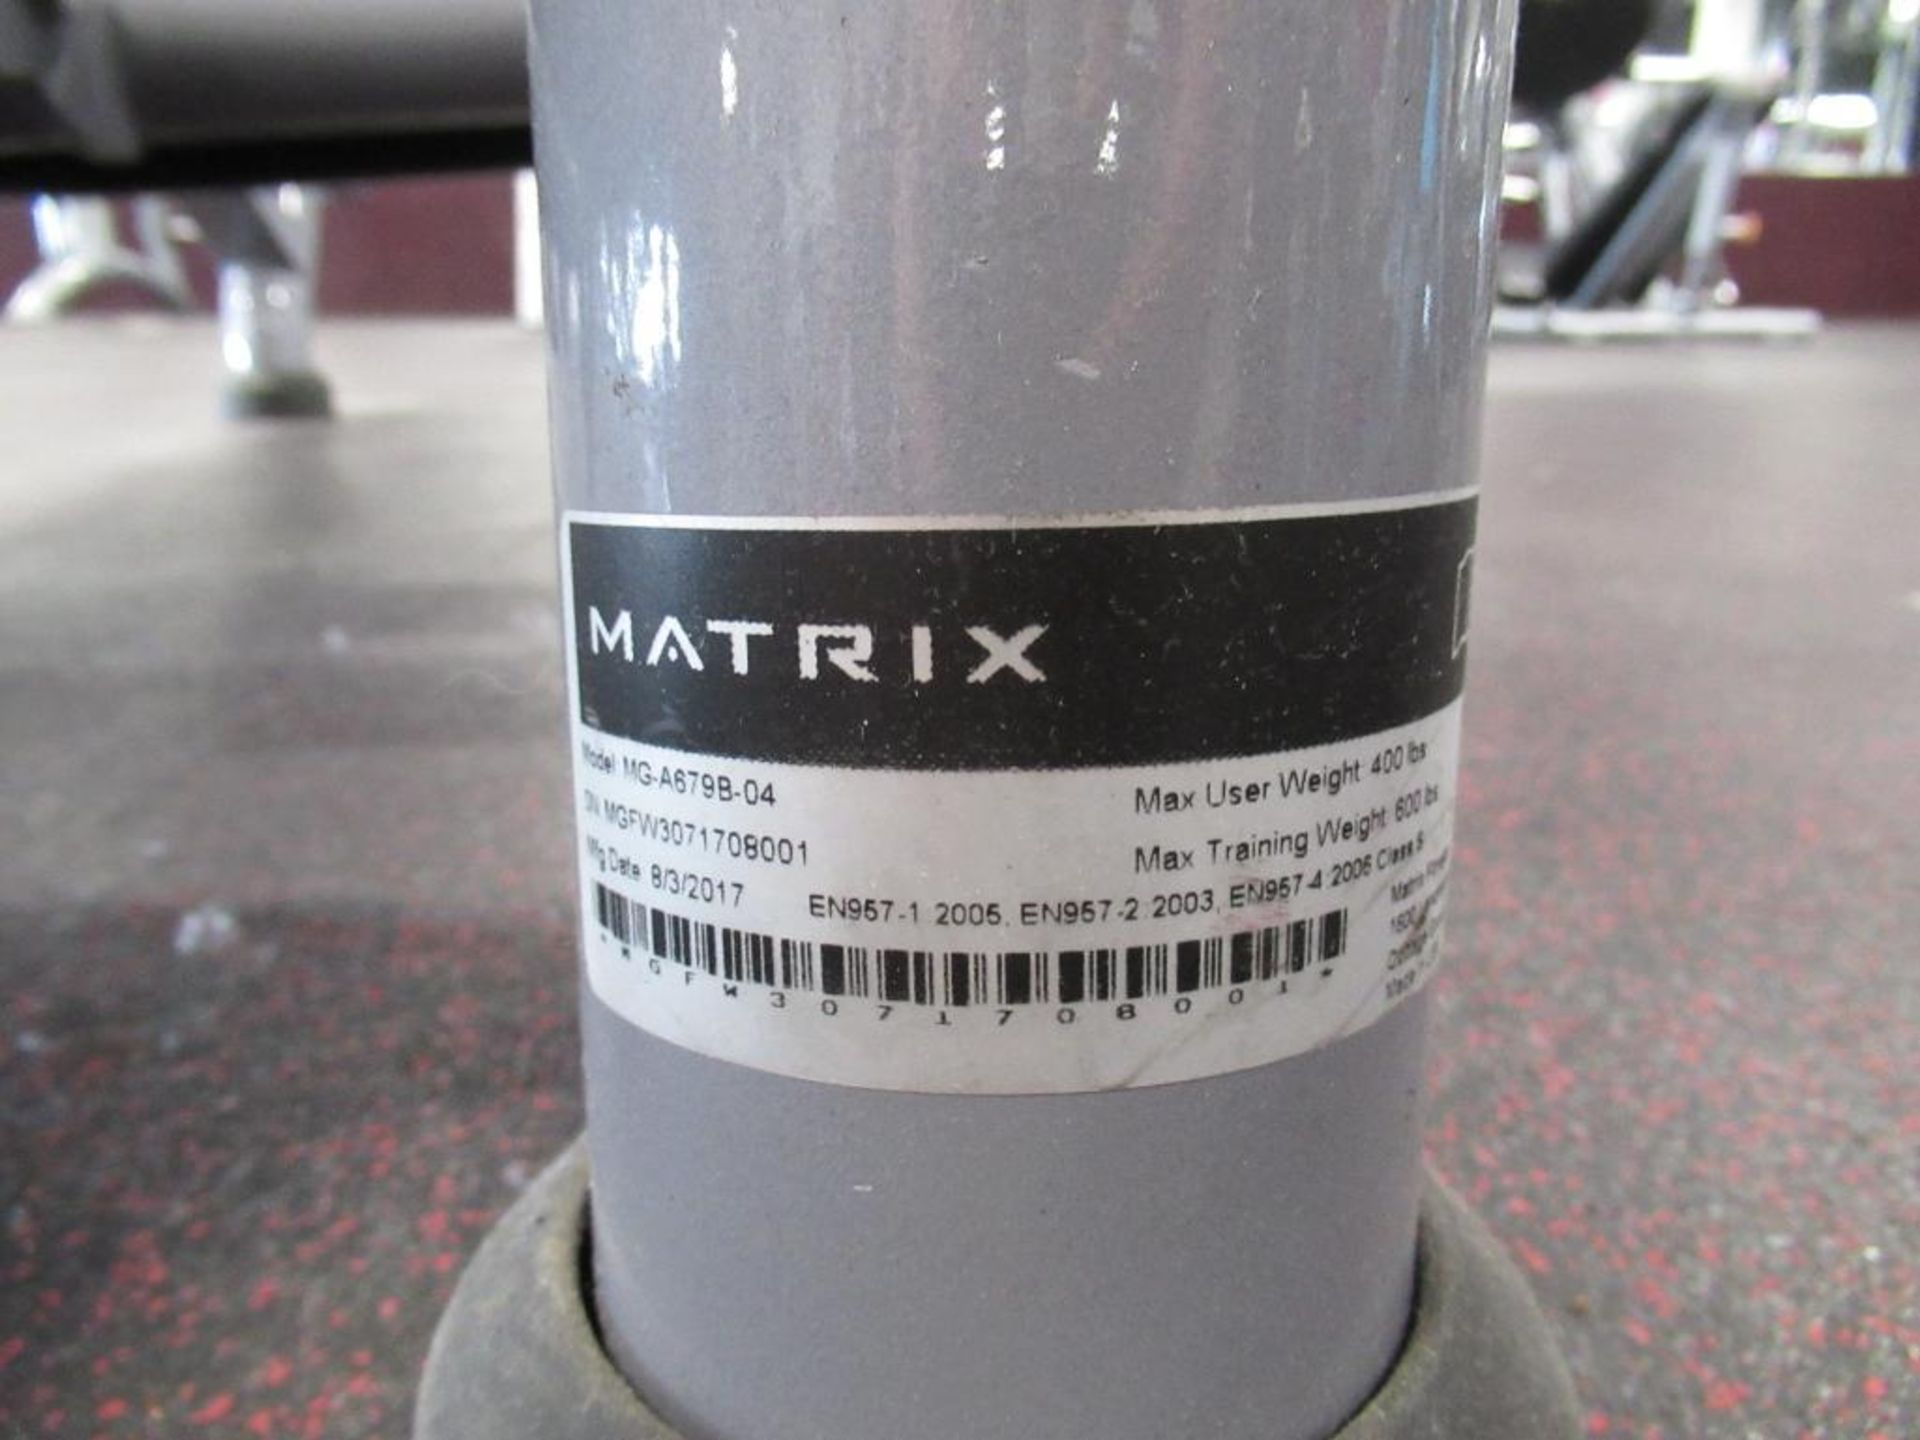 Matrix Model MG-A679B-04 Plated Loaded Bench Press, Spotting Deck, Plate Storage, Max Weight 400 lbs - Image 5 of 5